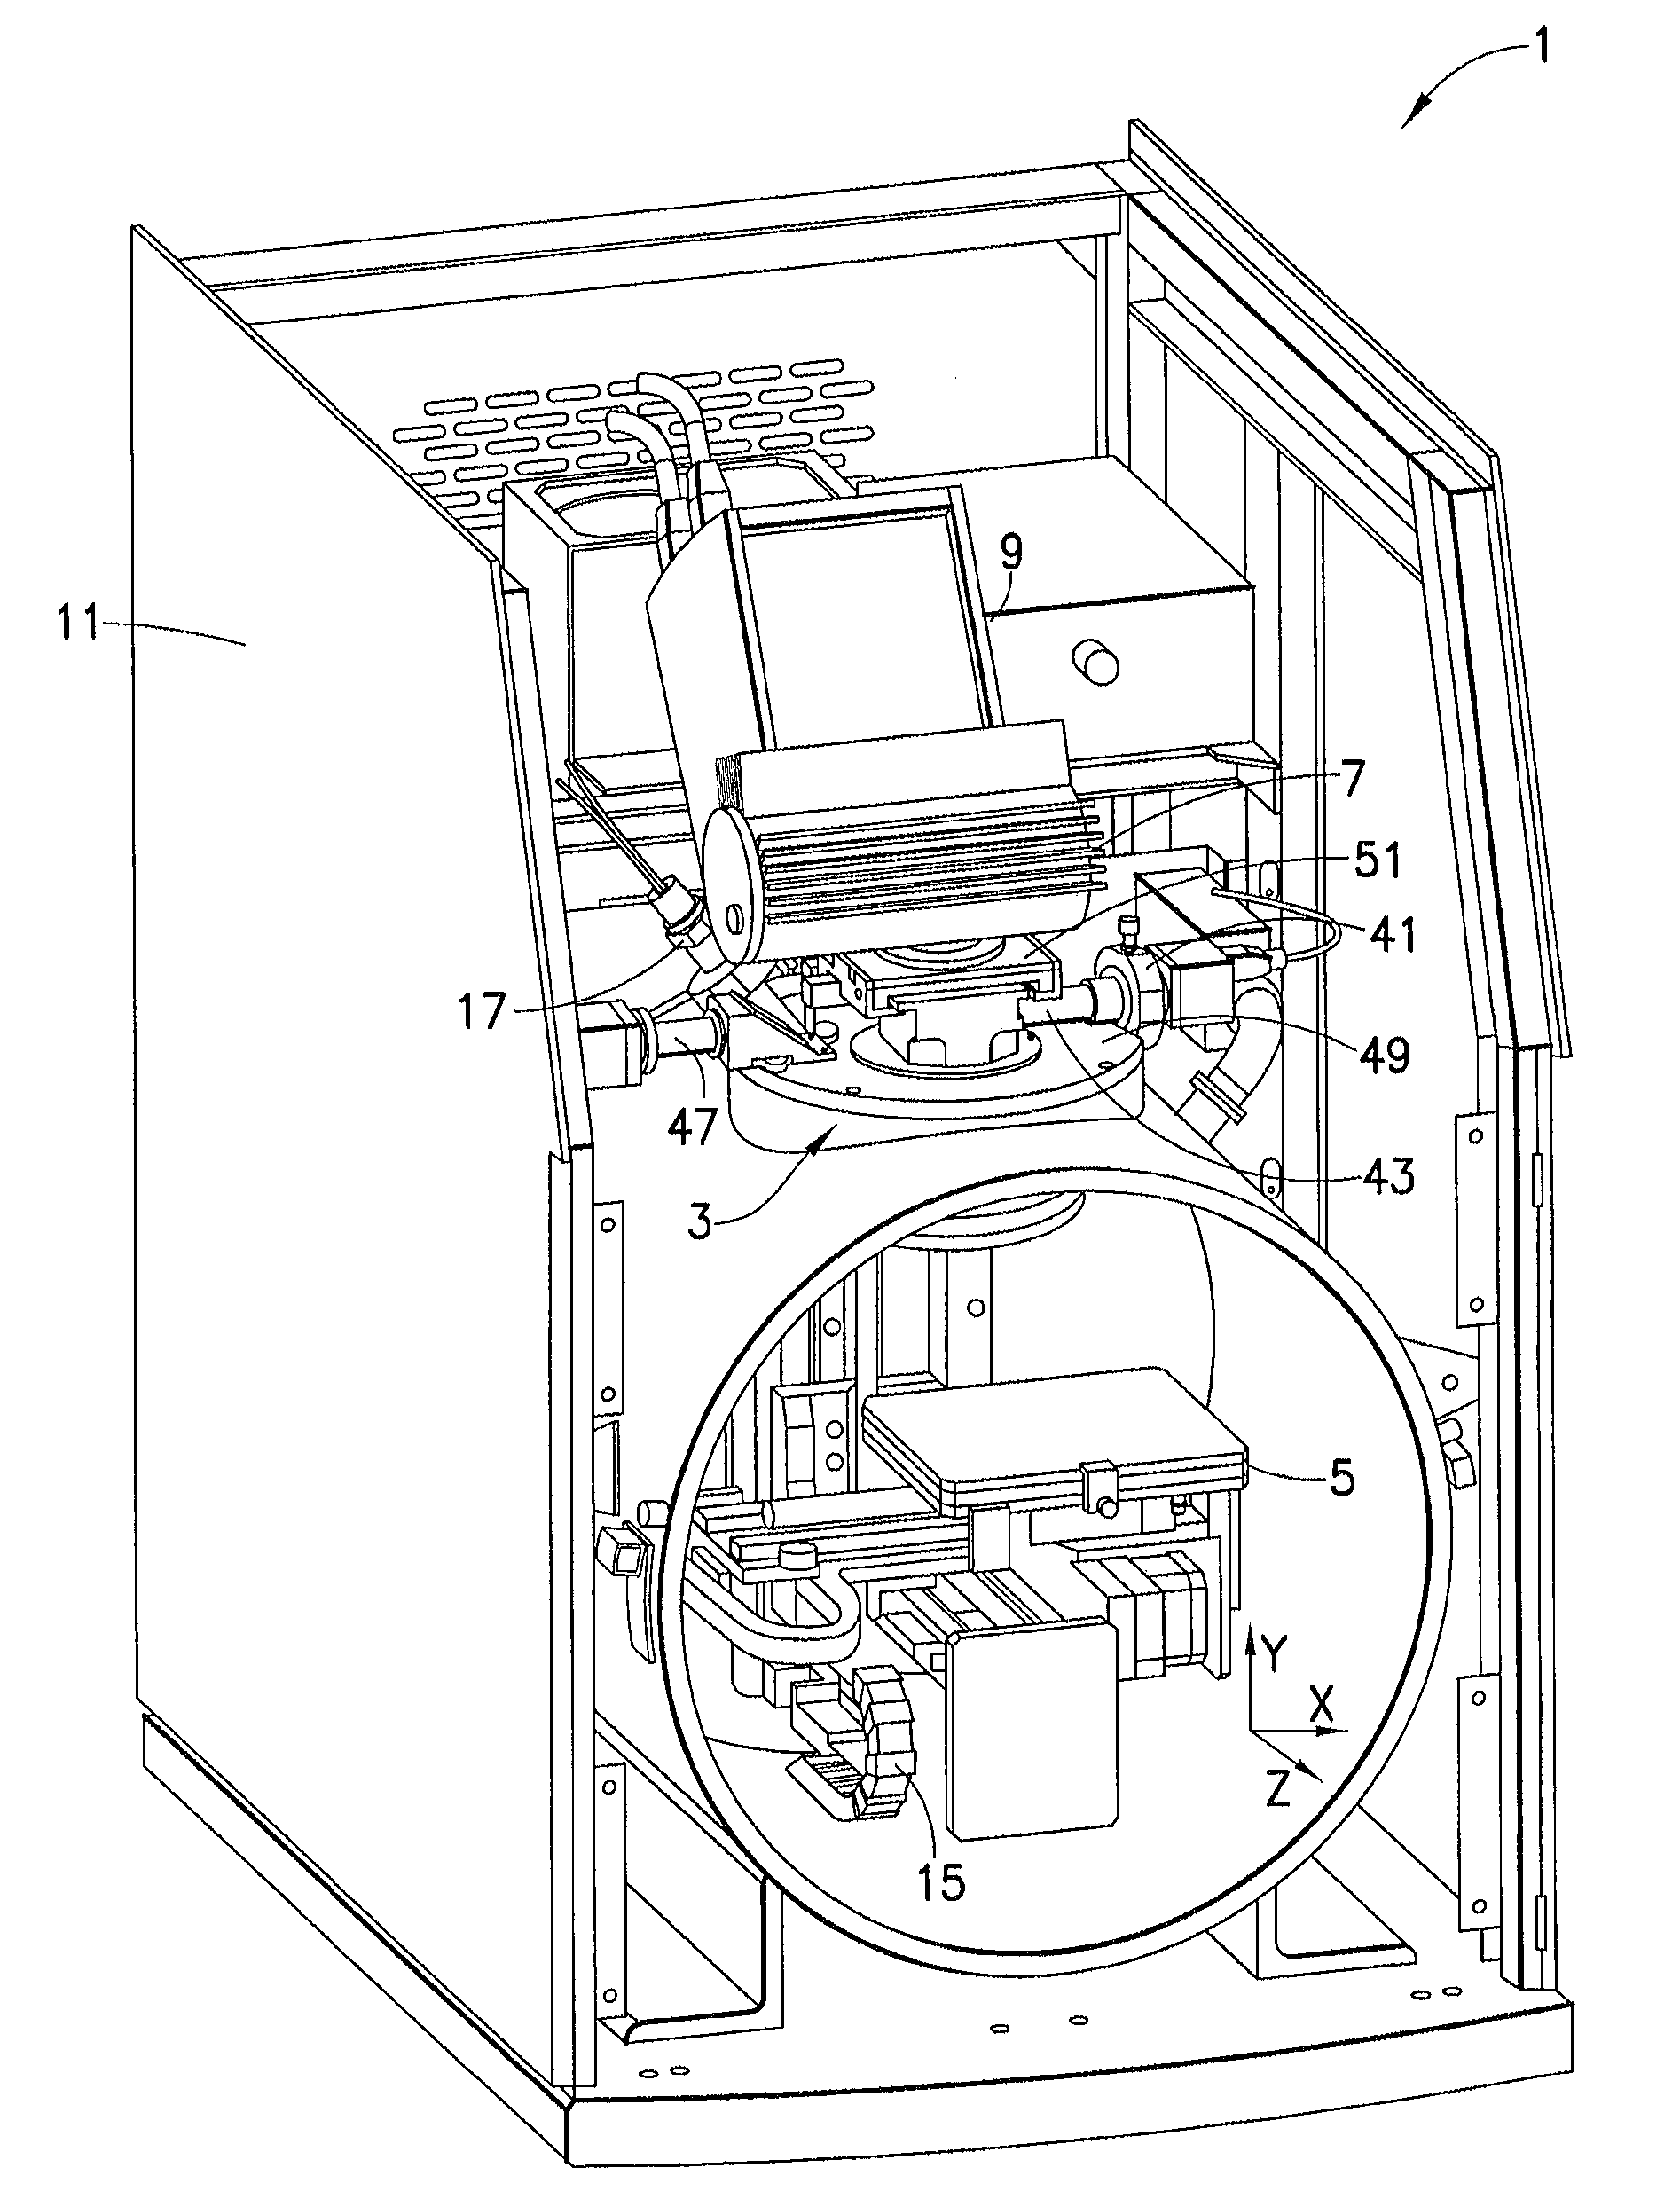 Optical Positioner Design in X-Ray Analyzer for Coaxial Micro-Viewing and Analysis